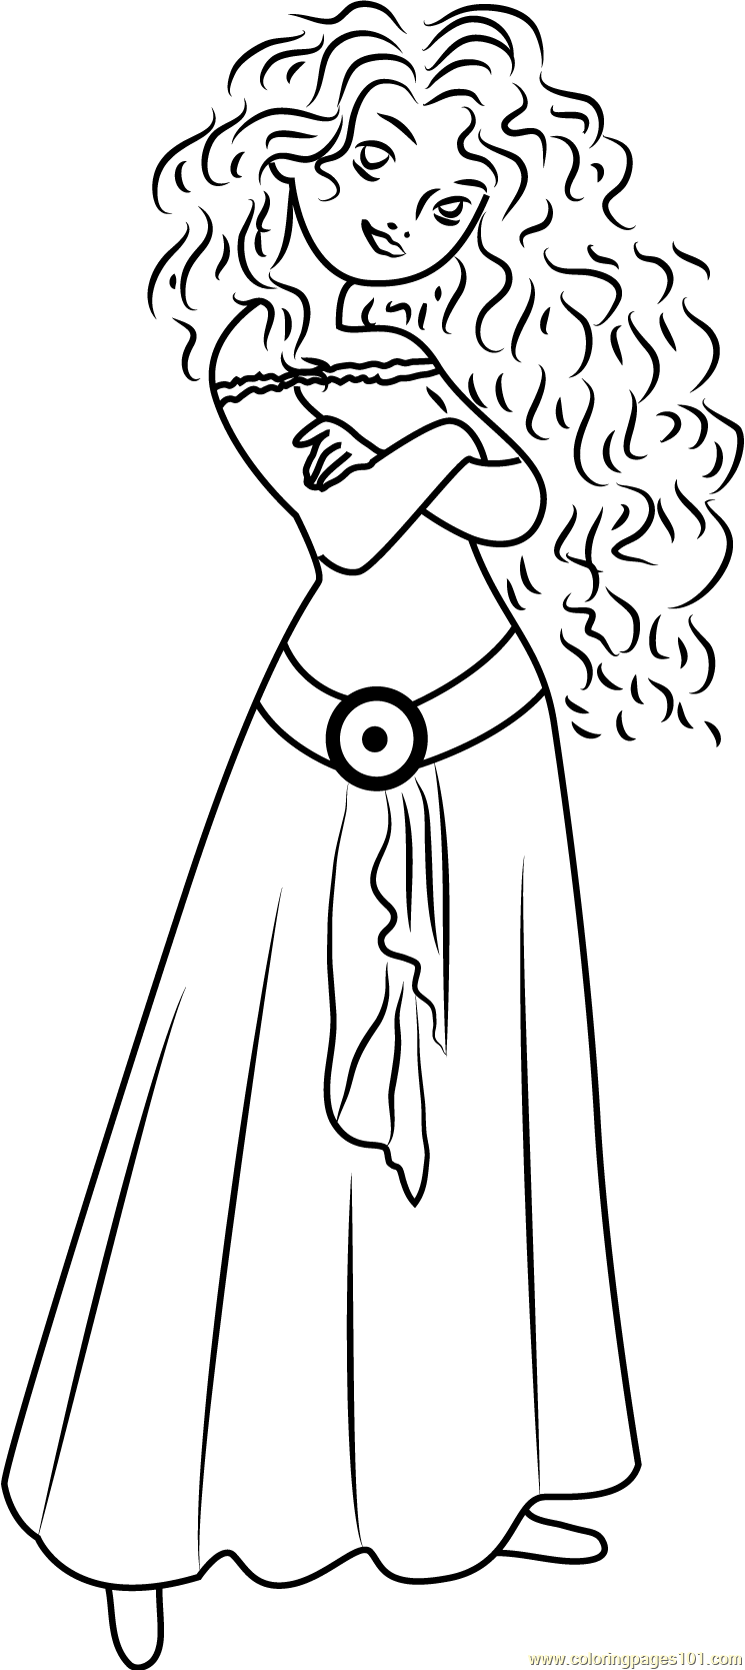 Cute Merida Coloring Page - Free Brave Coloring Pages ...